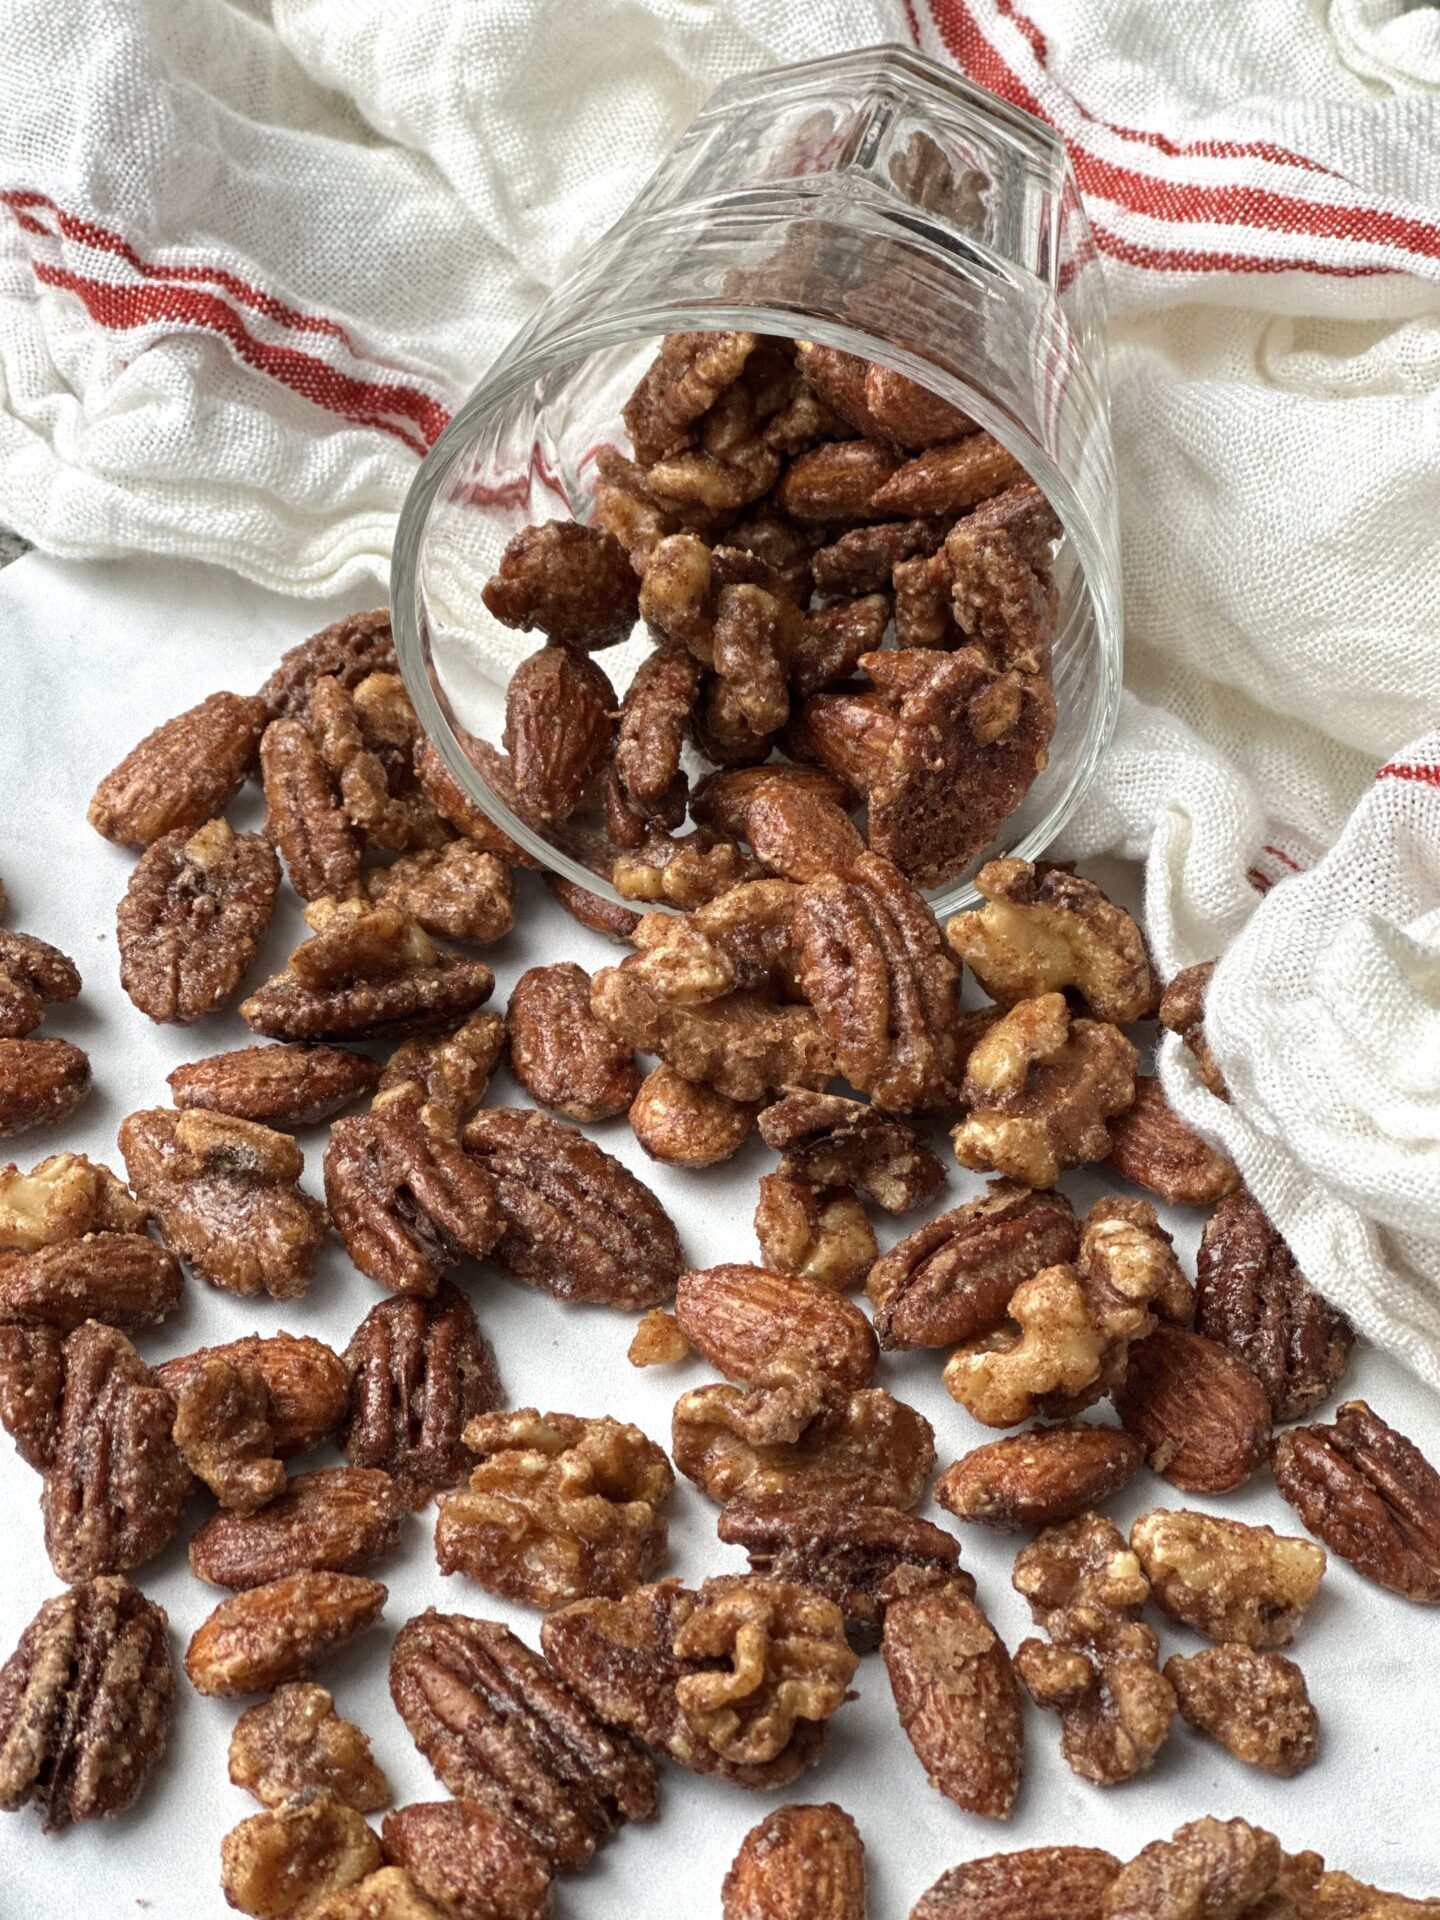 Recipe for homemade sweet and spicy cocktail nuts for your holiday party